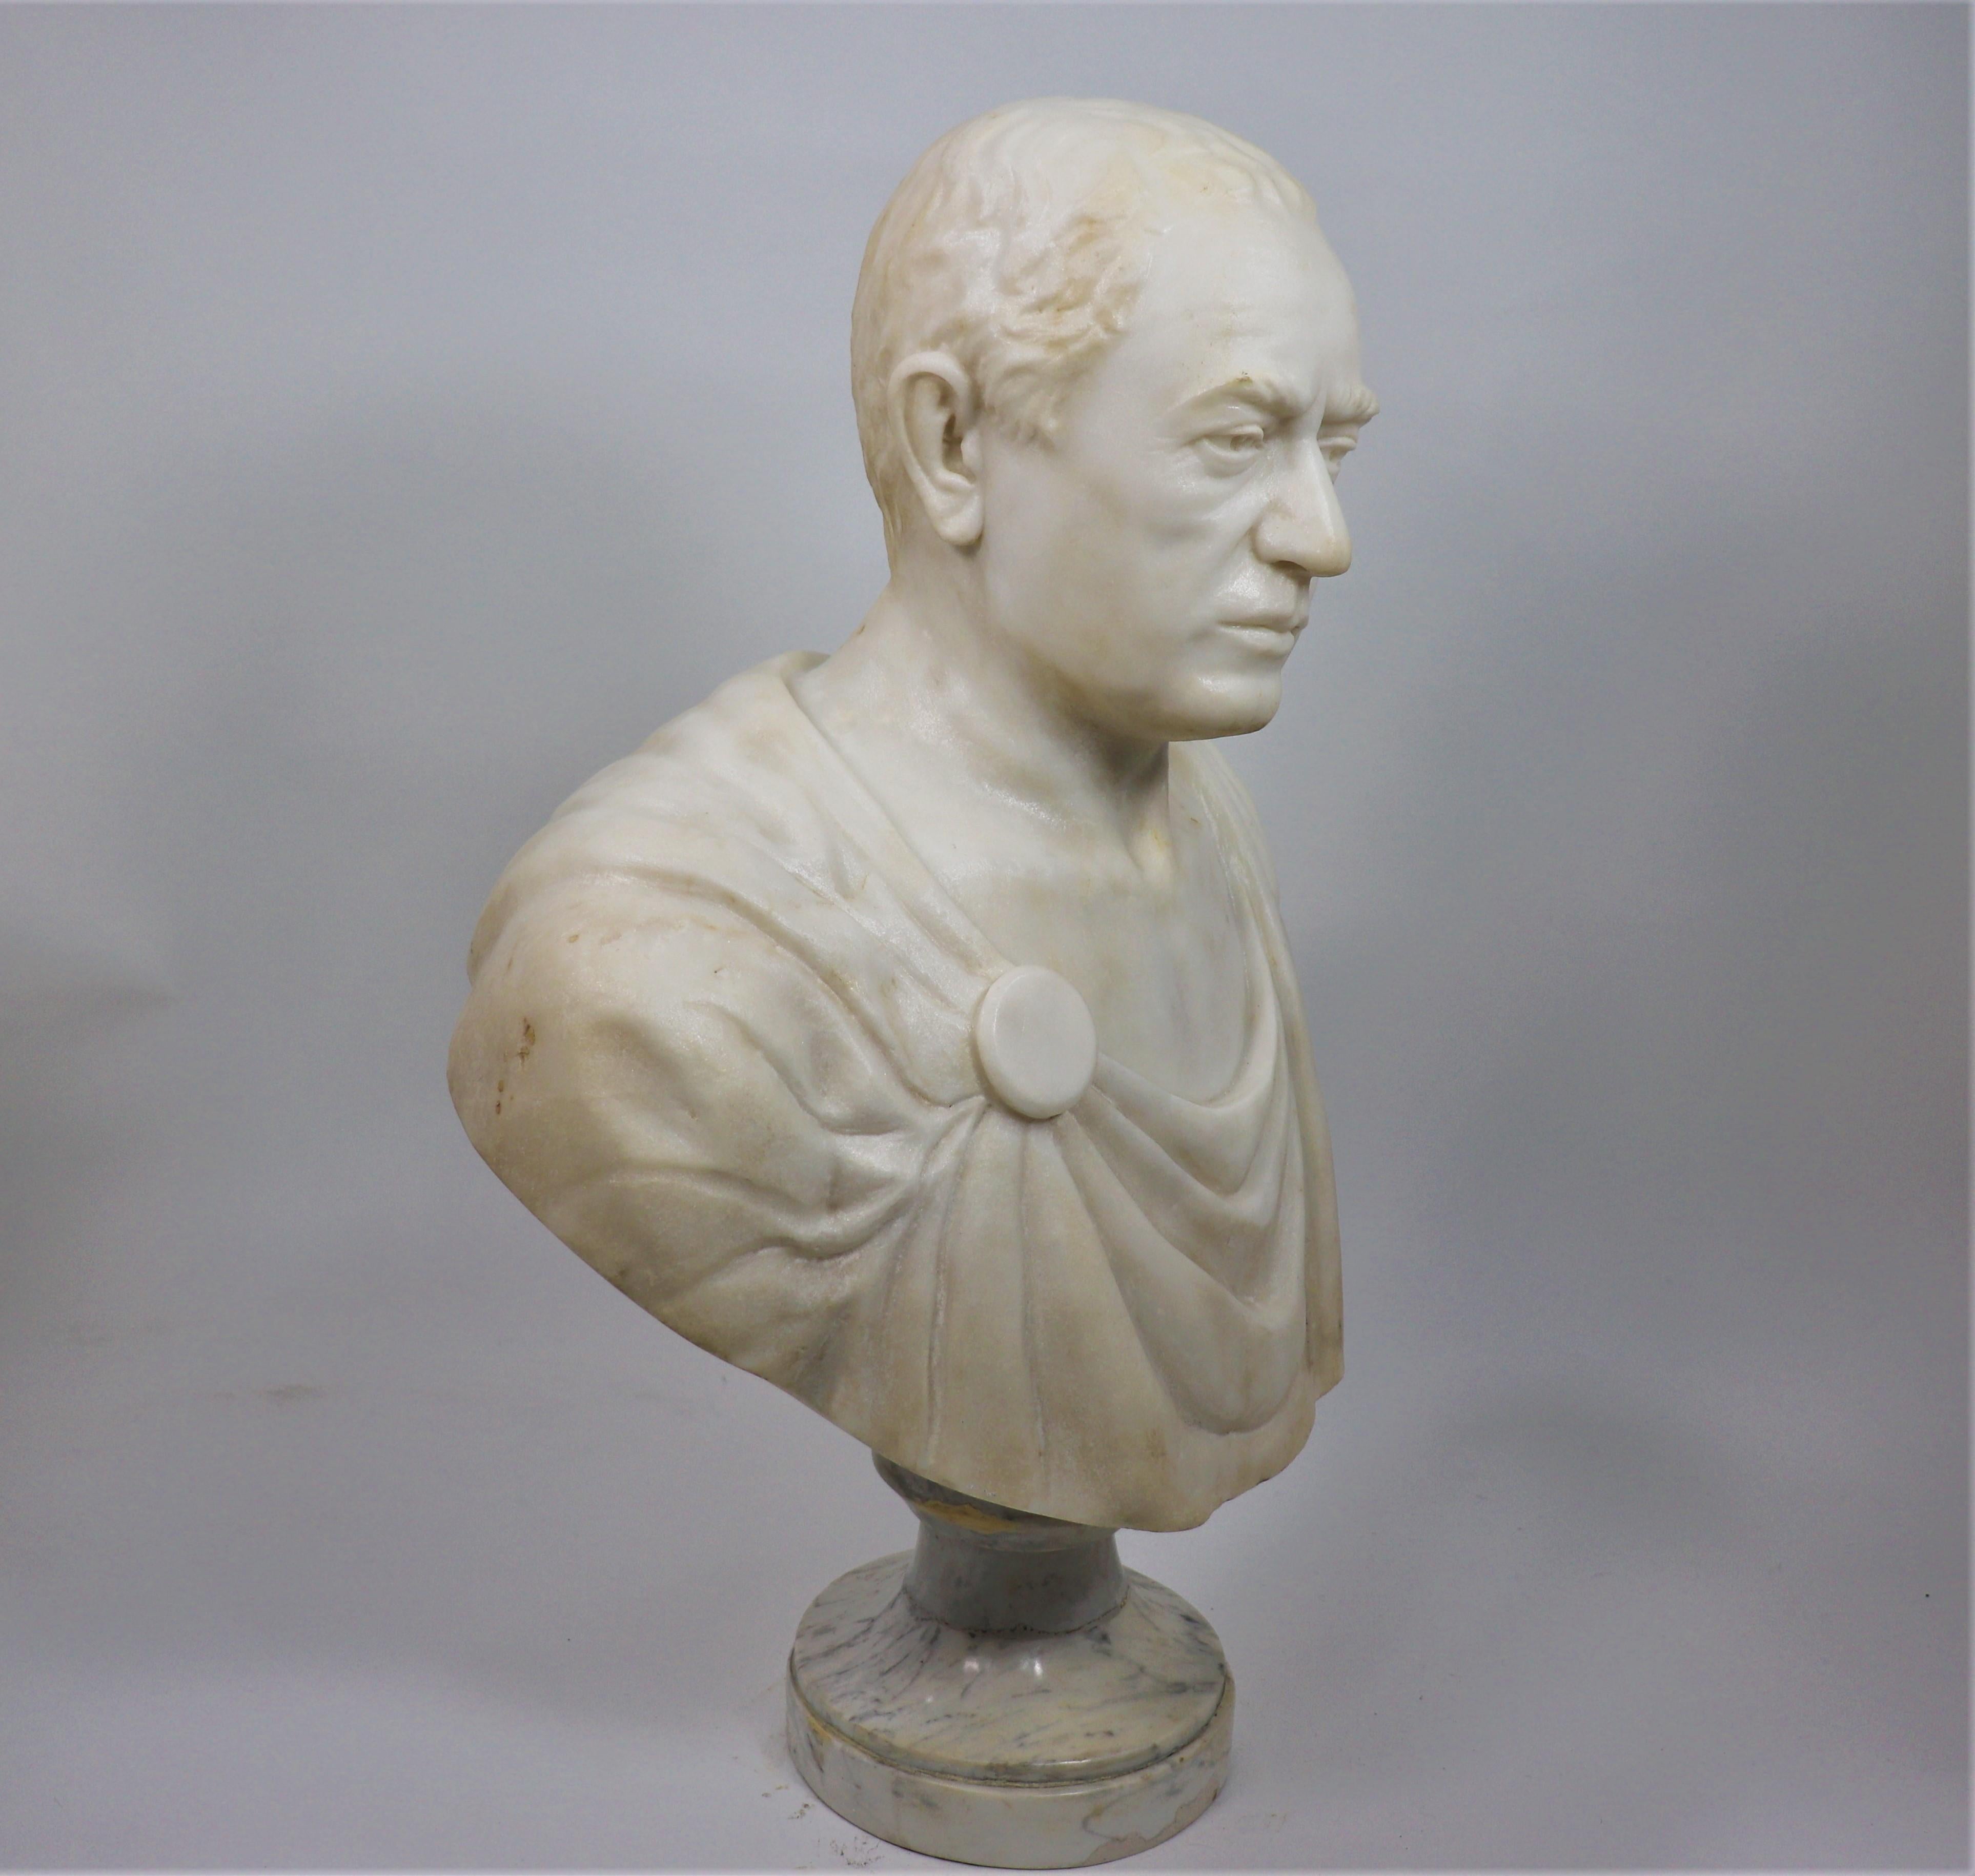 Veni, Vidi, Vici - “I came, I saw, I conquered,” are the words attributed to Julius Caesar, the man who changed the course of Greco-Roman history. This finely carved white marble reproduction bust showcases Gaius Julius Caesar. Born in 100 B.C